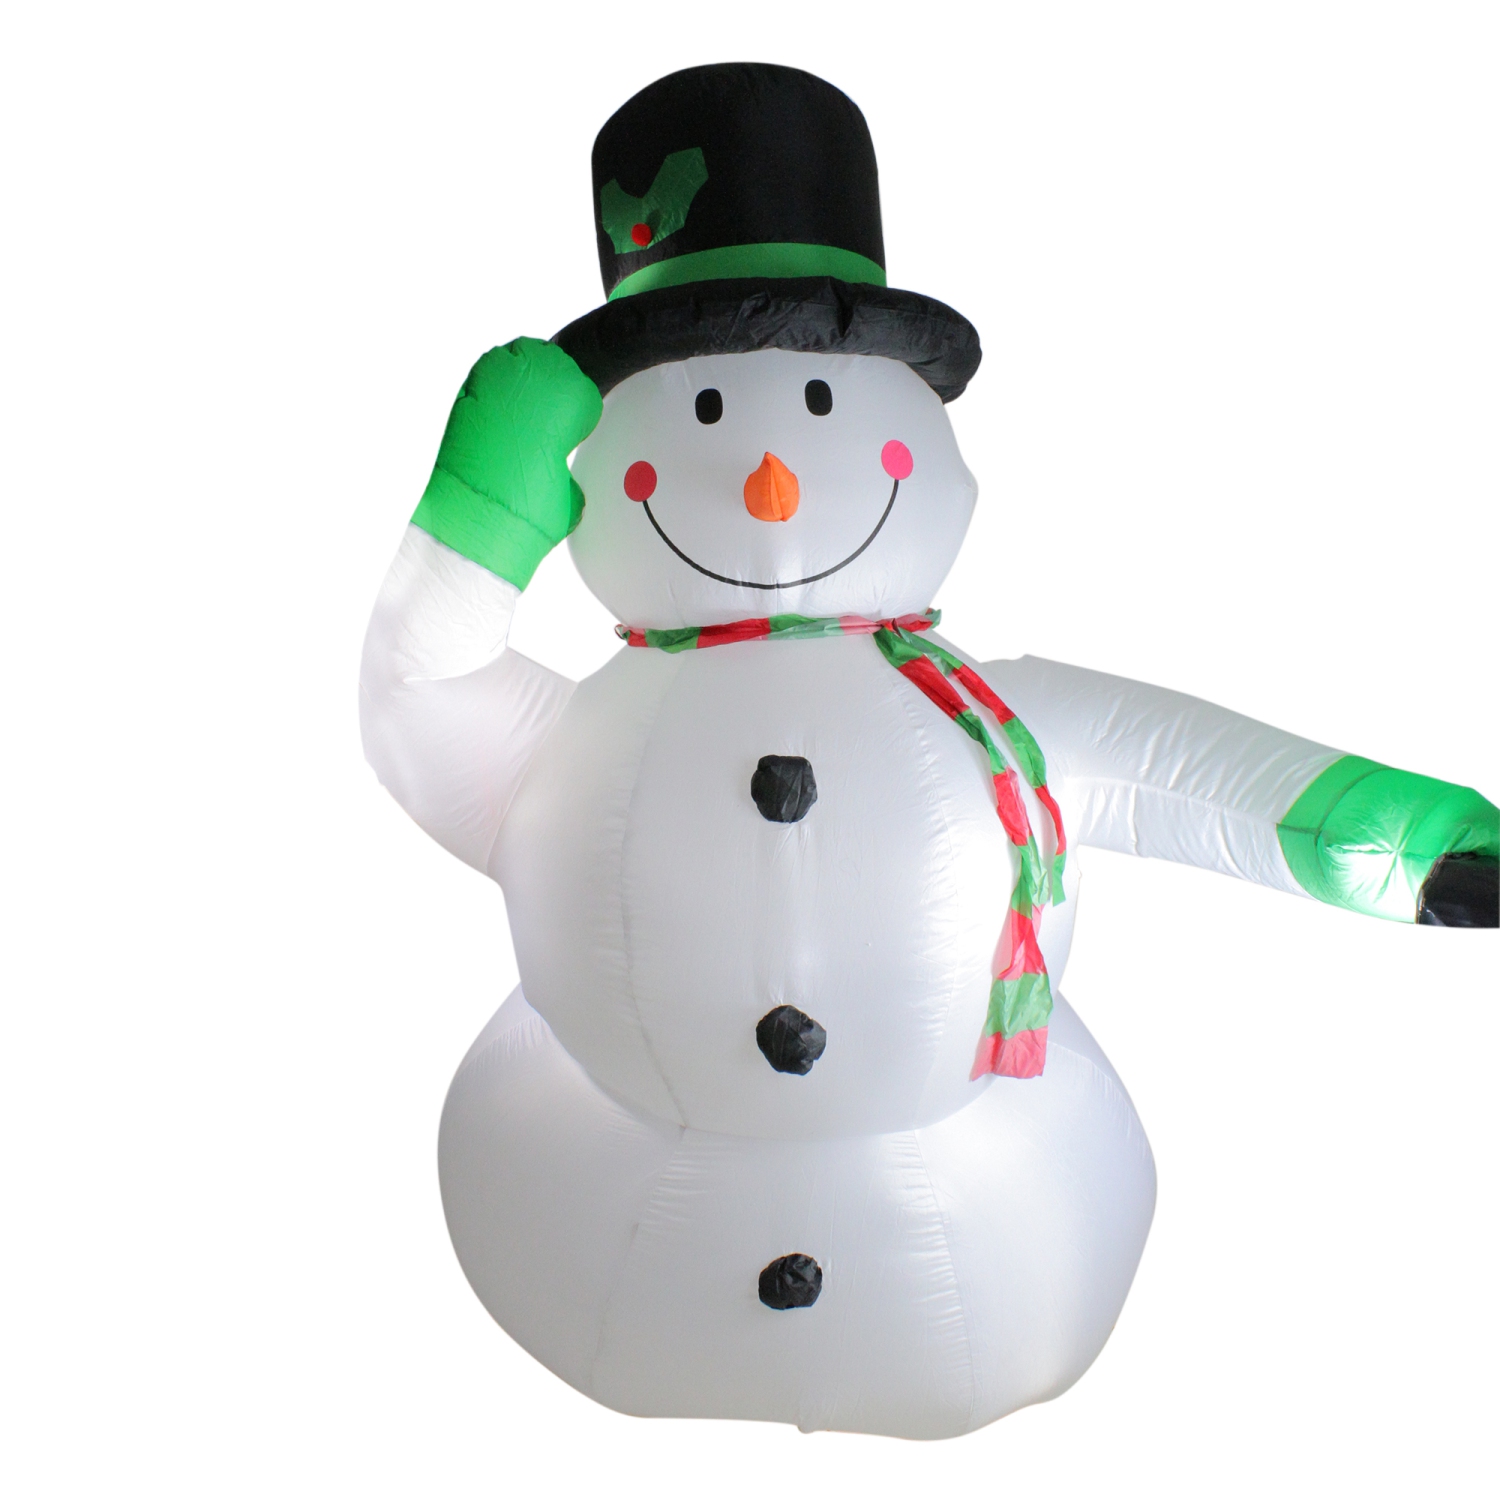 8' Inflatable Lighted Snowman Outdoor Christmas Decoration